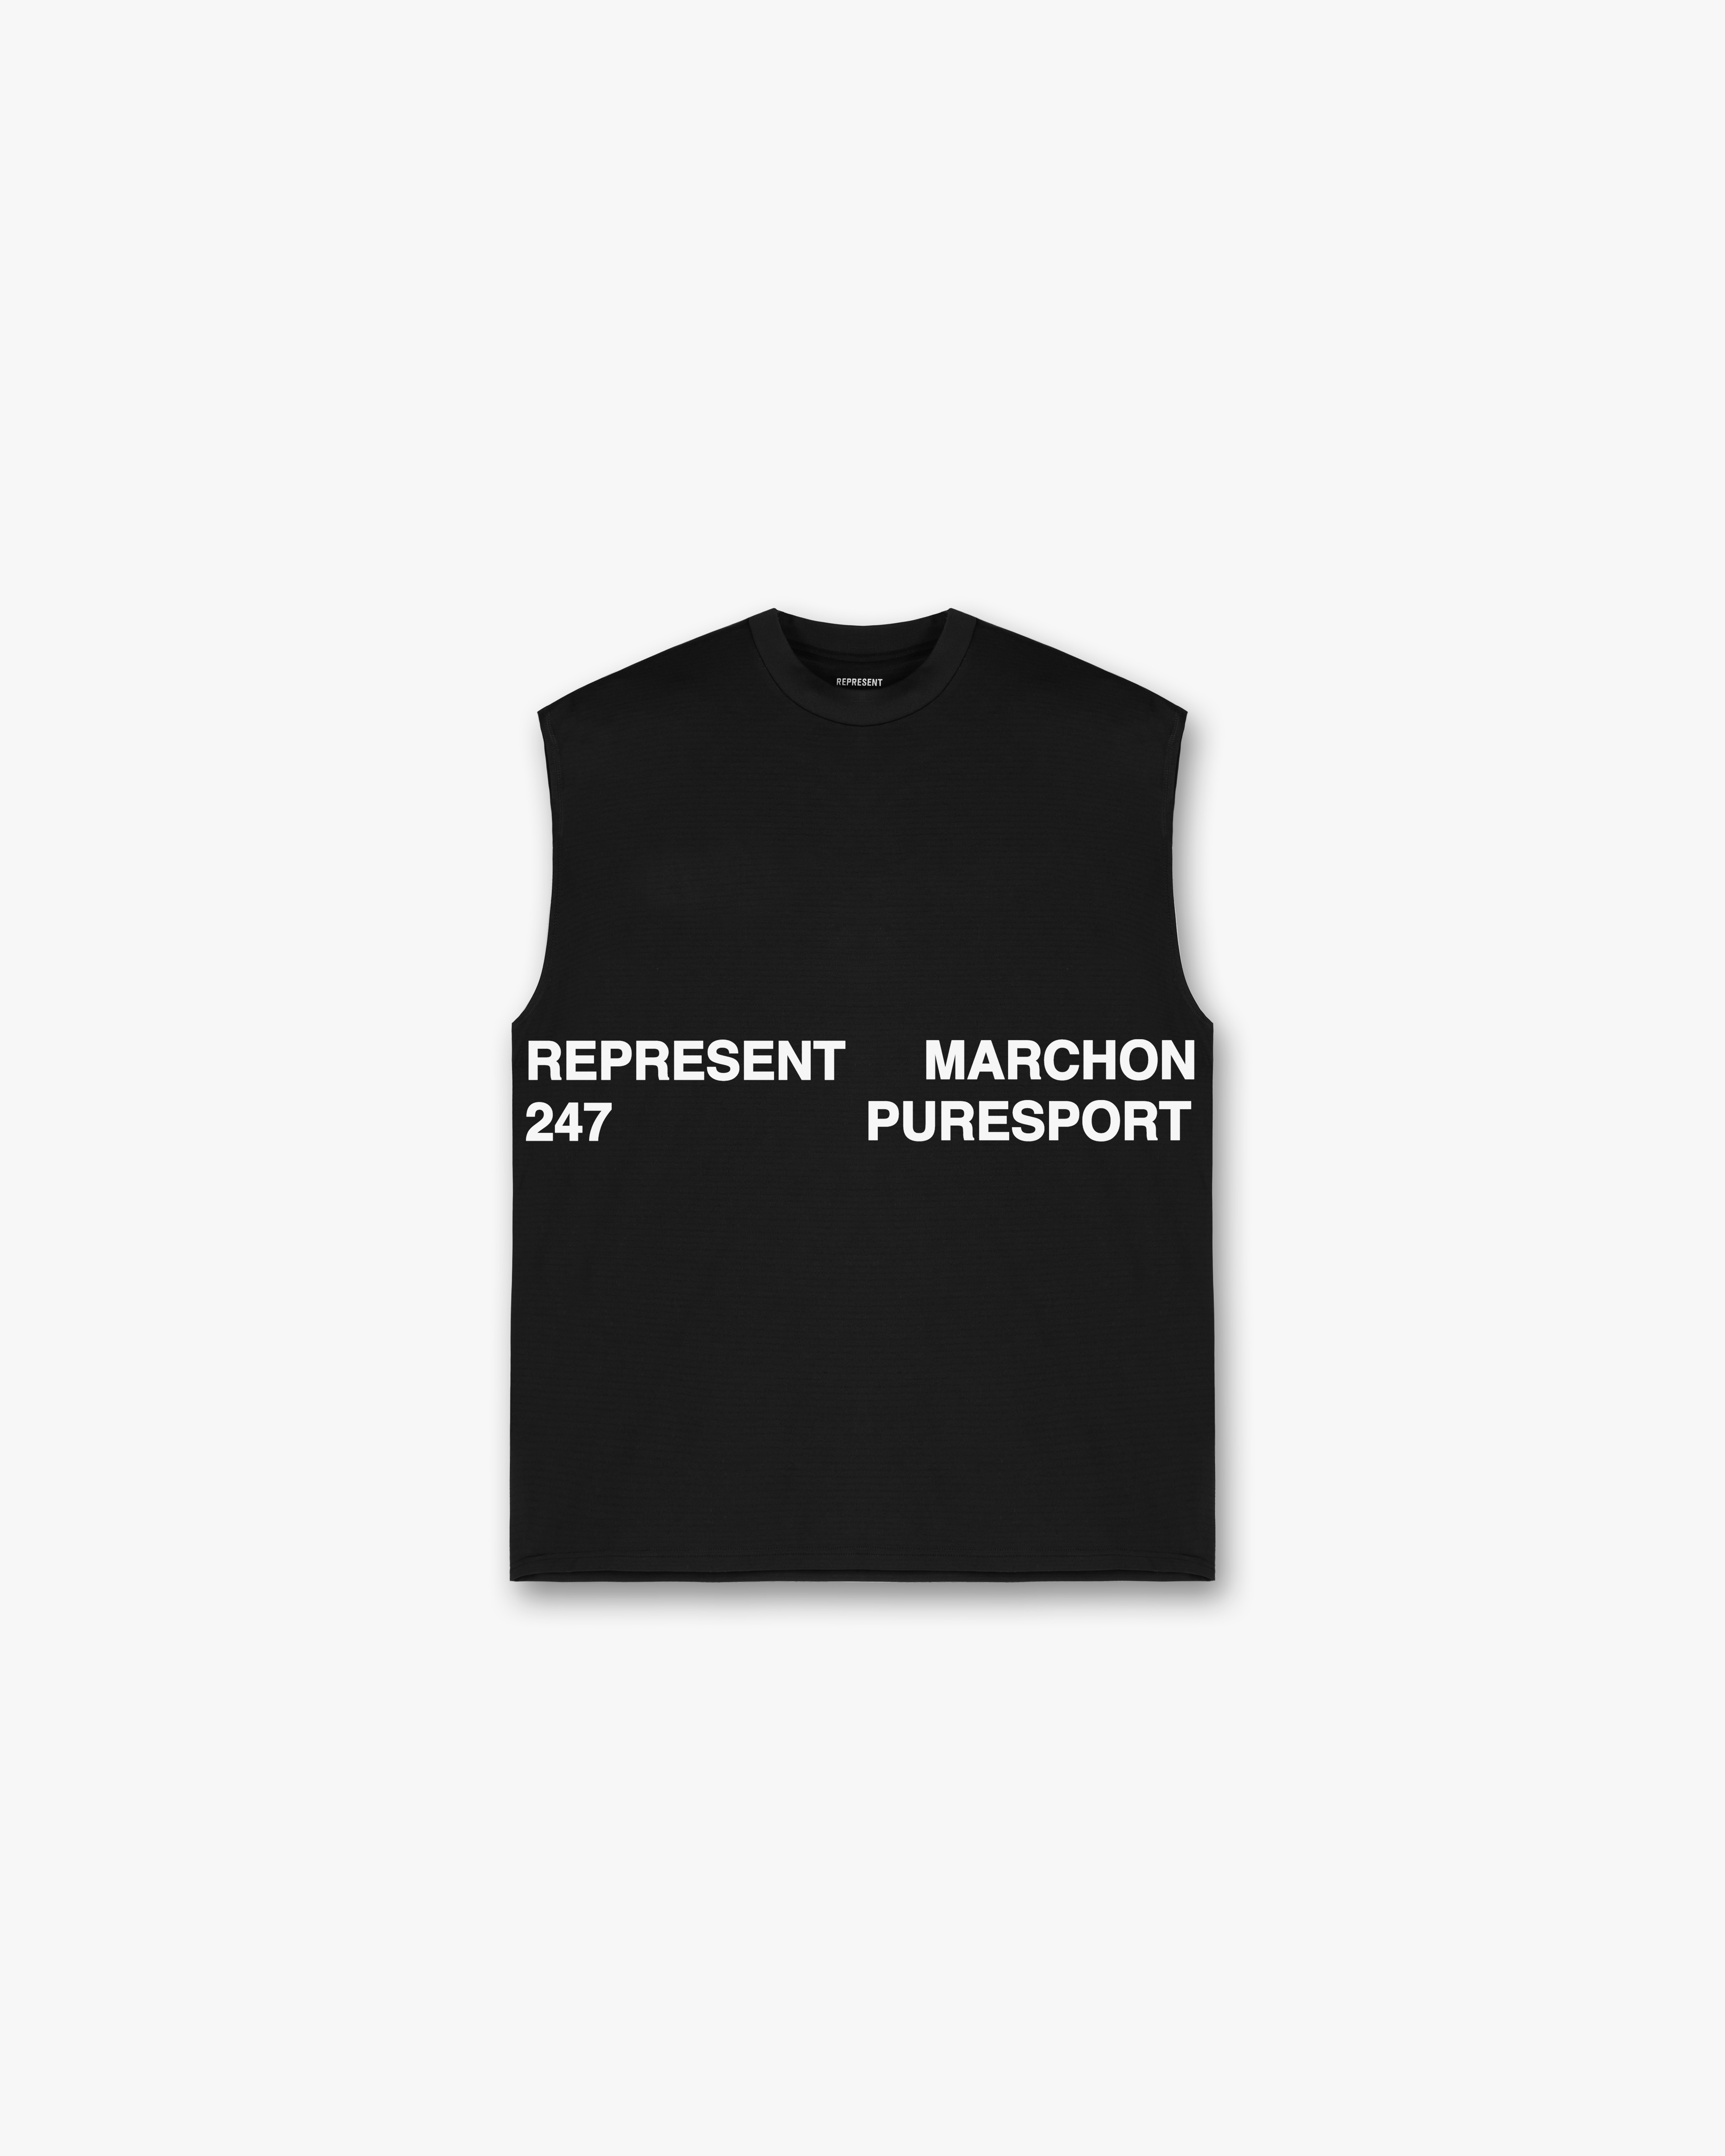 REPRESENT: PURESPORT : MARCHON: LAUNCHES EXCLUSIVELY AT FLANNELS VIPERMAG